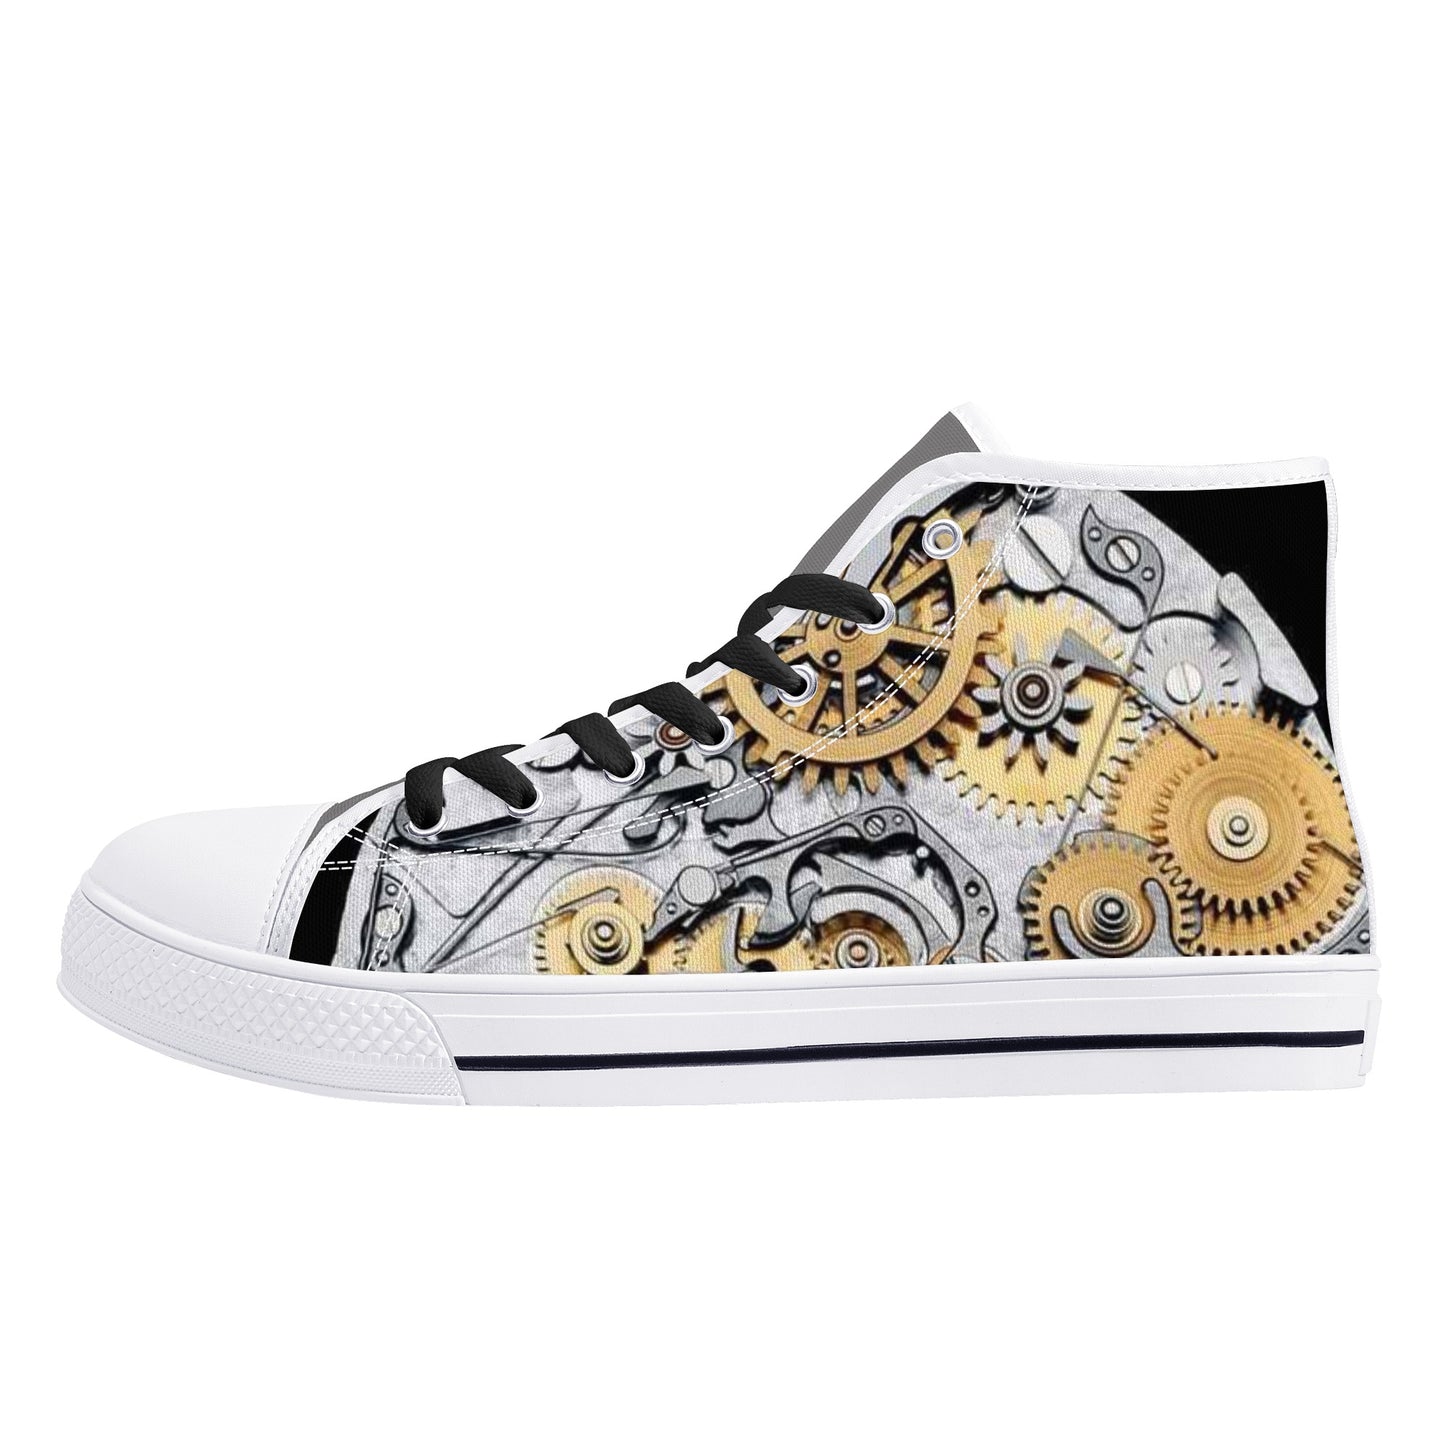 Mens DOPiFiED GADGETS High Top Canvas Sneakers